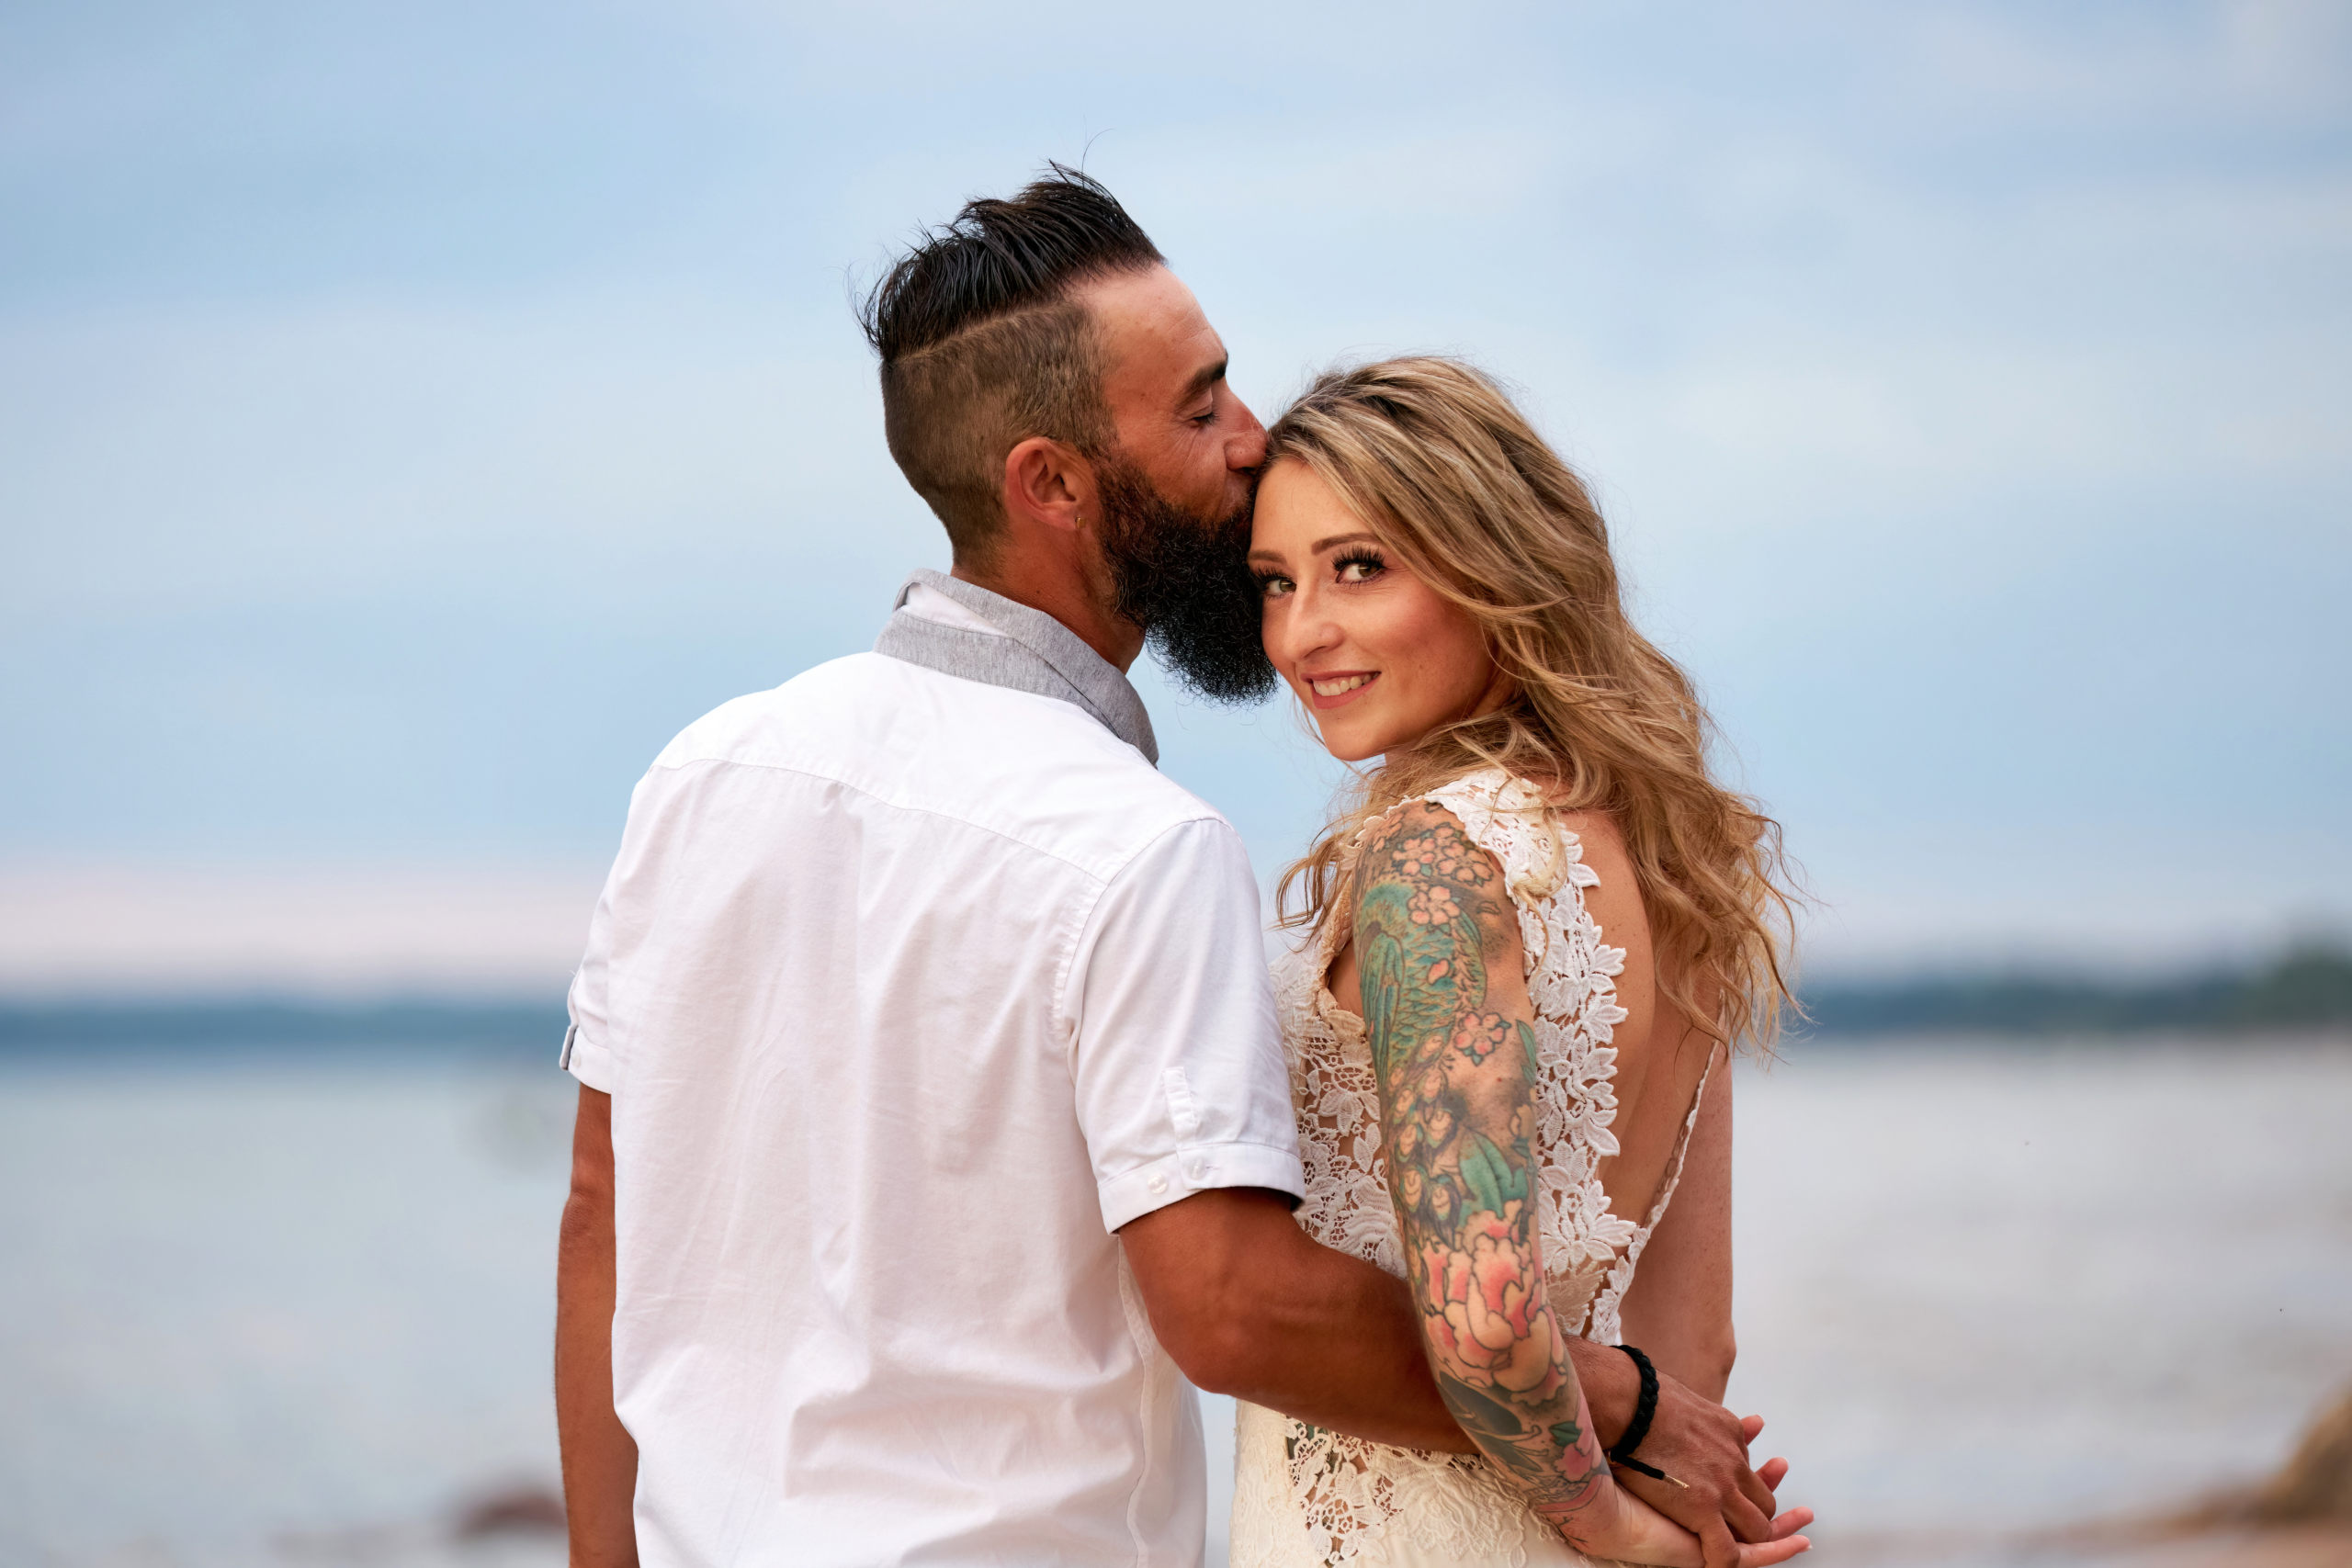 Woman Looks Over her Shoulder While Husband Embraces Her at Beach